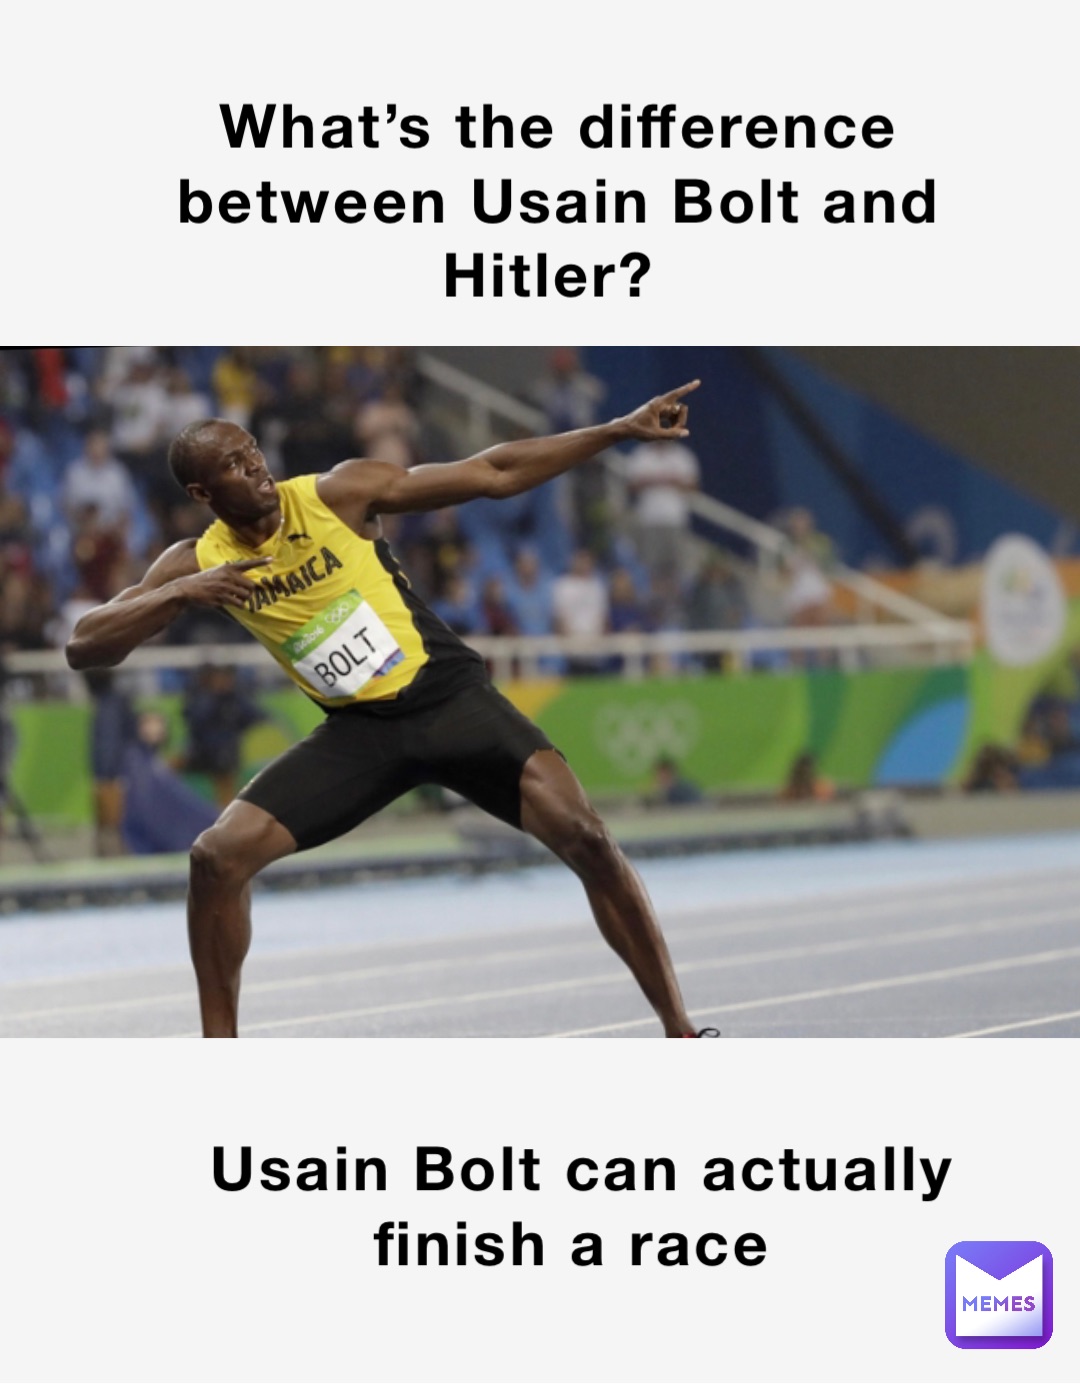 What’s the difference between Usain Bolt and Hitler? Usain Bolt can actually finish a race